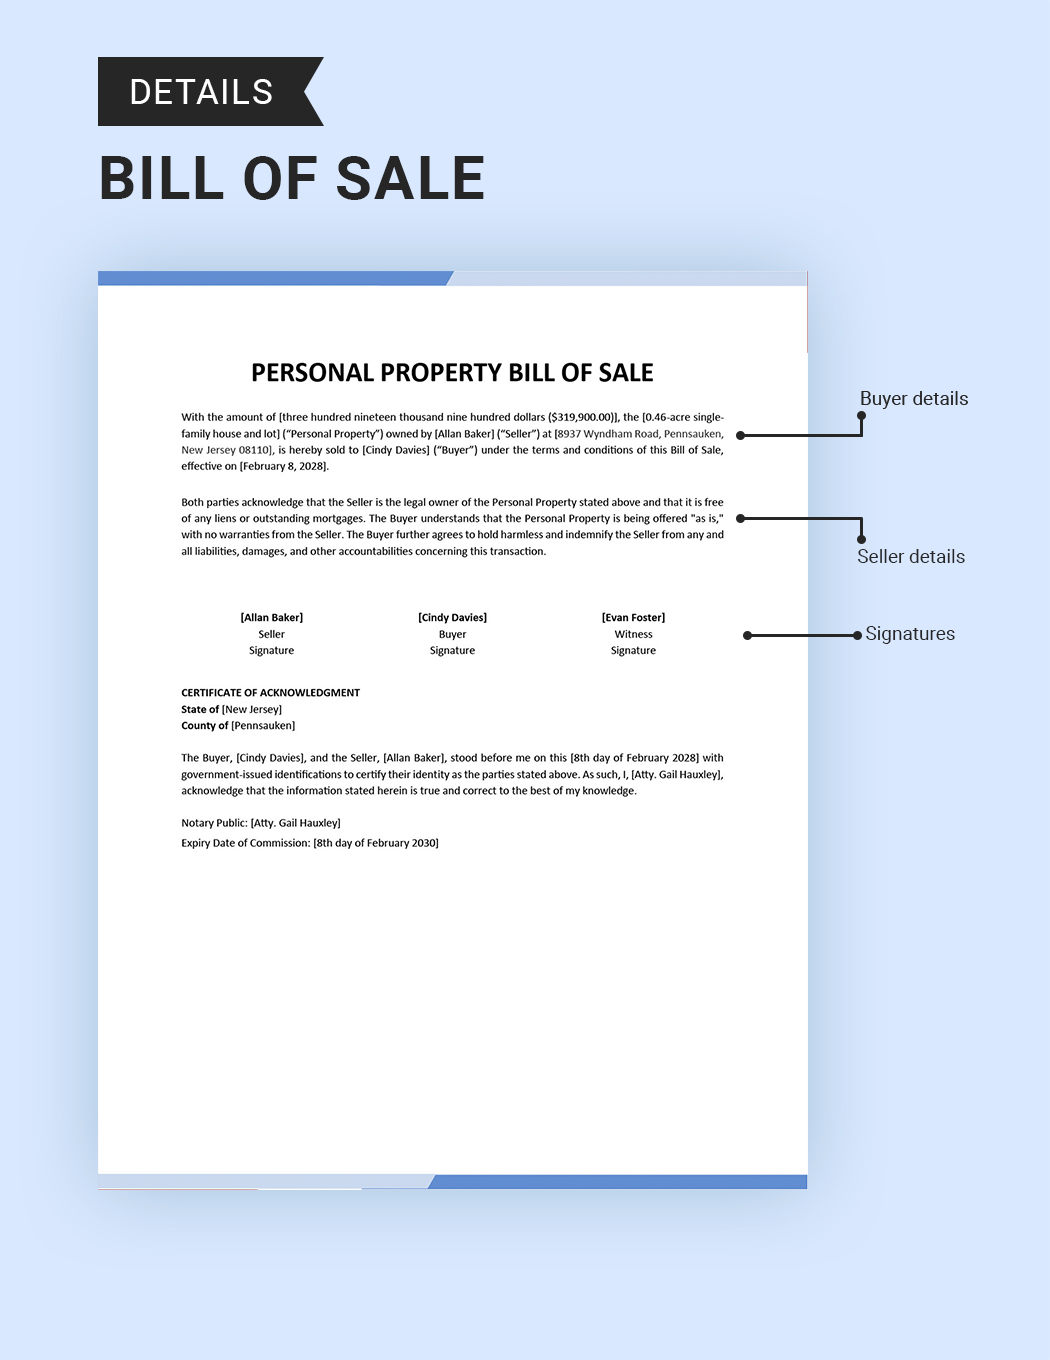 Personal Property Bill of Sale Template